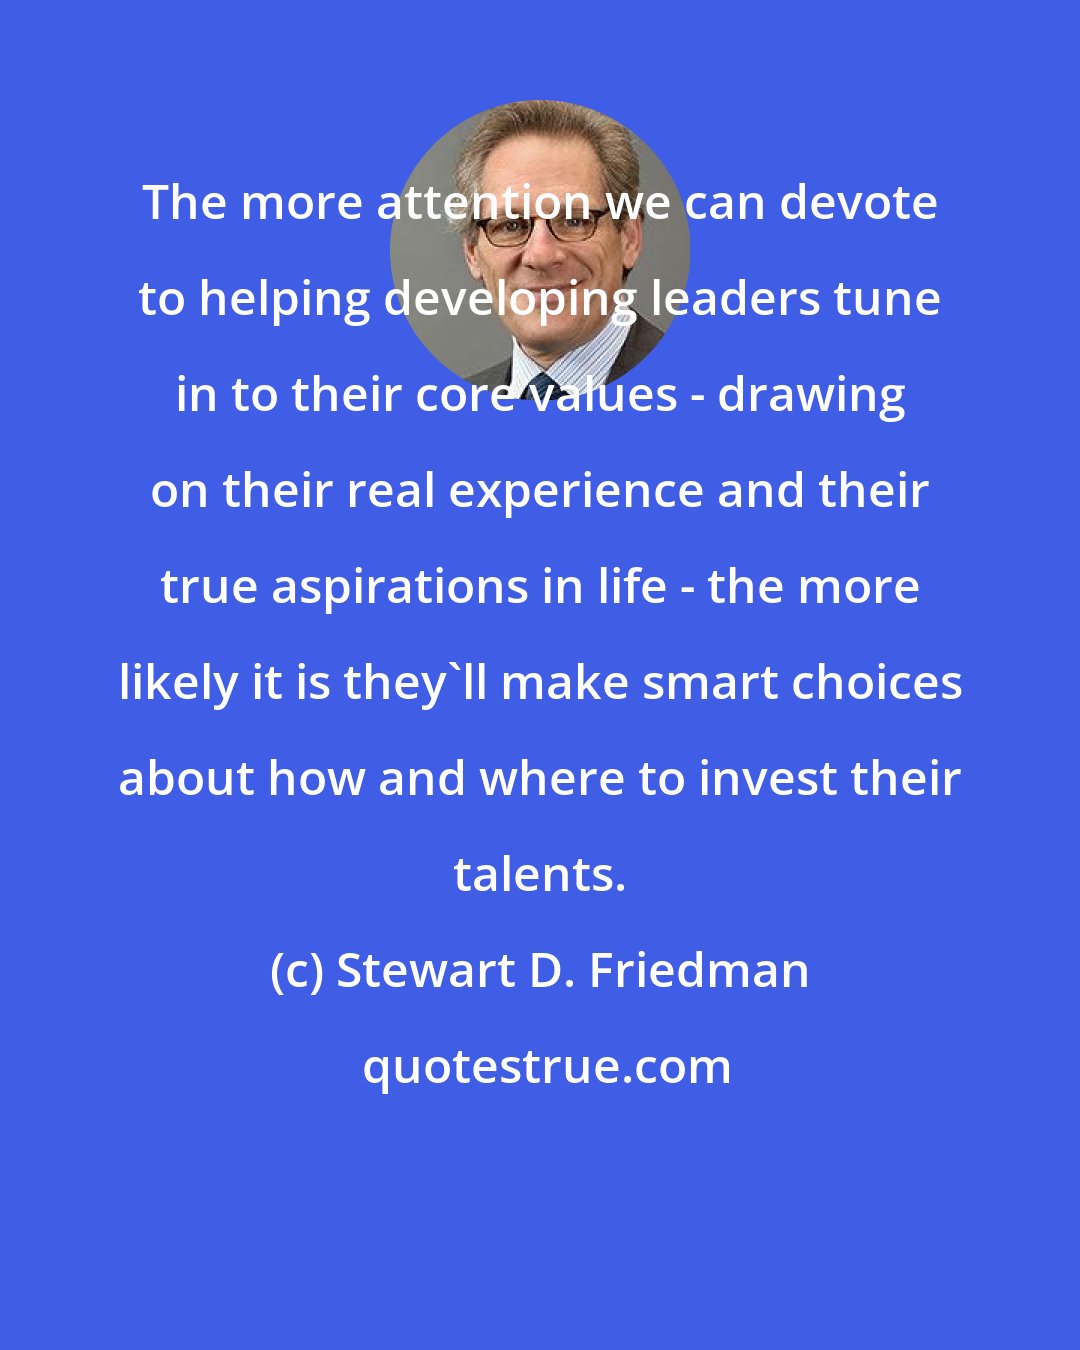 Stewart D. Friedman: The more attention we can devote to helping developing leaders tune in to their core values - drawing on their real experience and their true aspirations in life - the more likely it is they'll make smart choices about how and where to invest their talents.